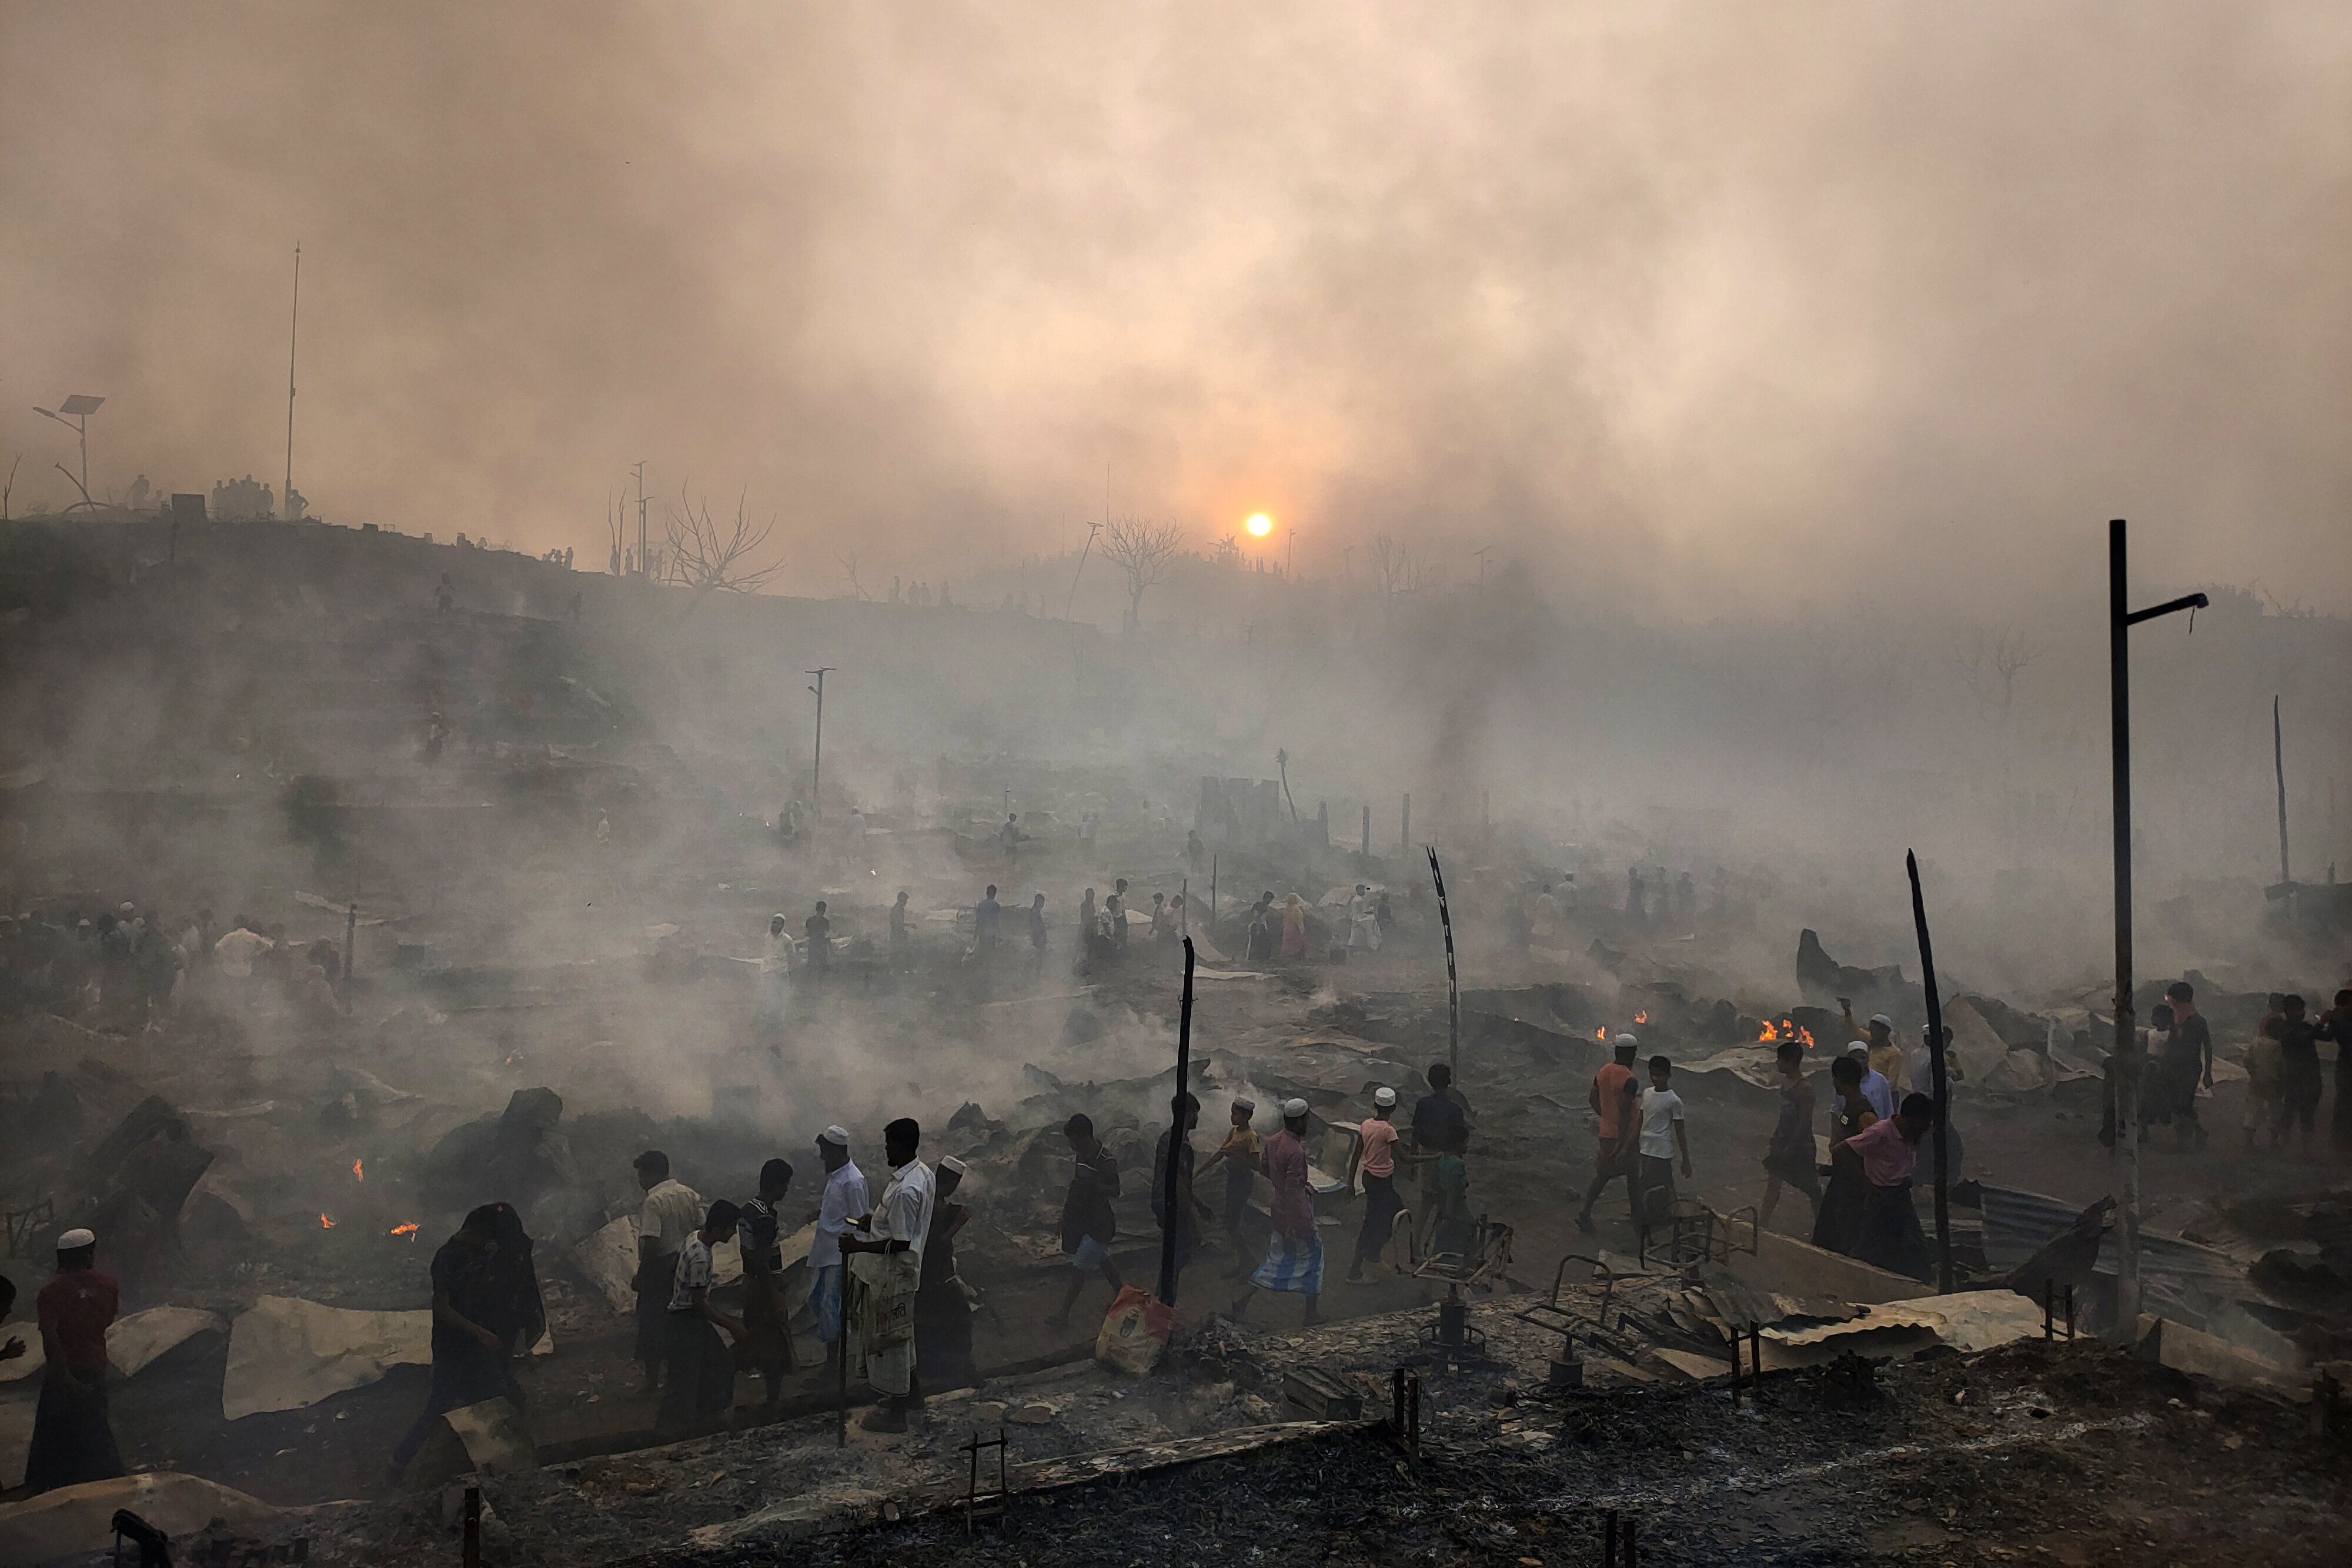 Rohingya refugees try to salvage their belongings after a massive fire in their camp in Bangladesh on Sunday left thousands homeless. Photo: AP